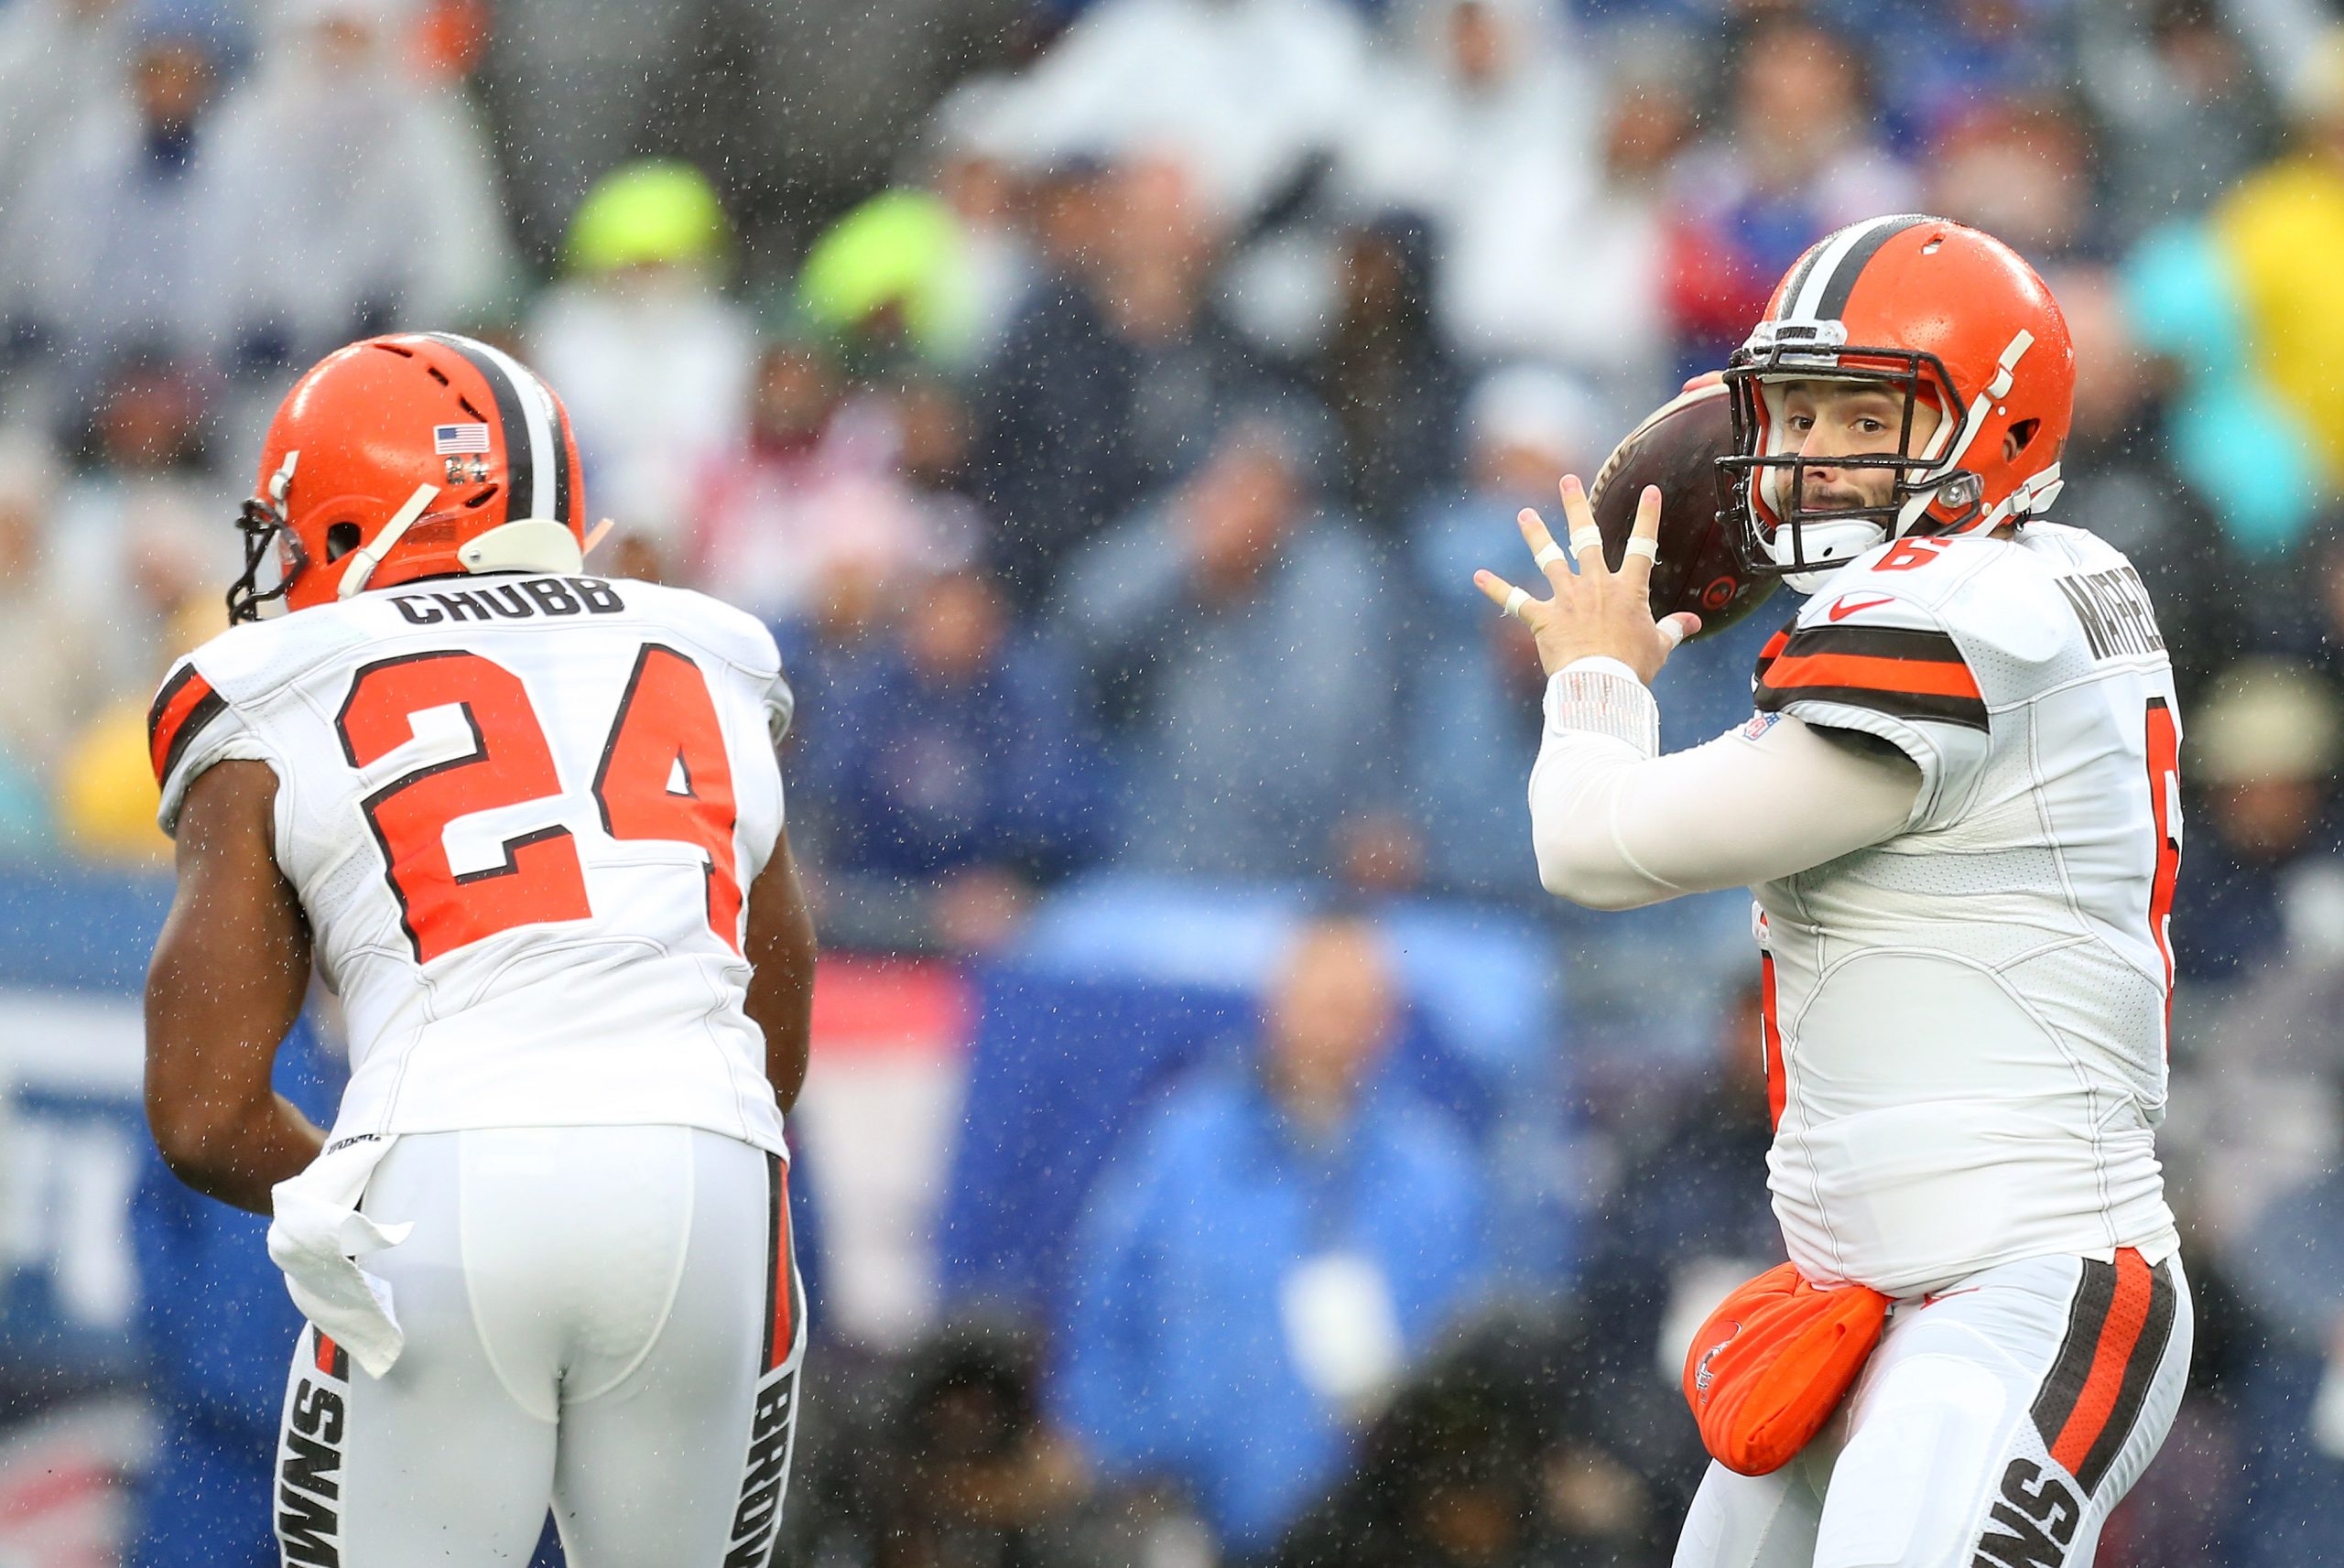 October 27, 2019; Foxborough, MA, USA; Cleveland Browns quarterback Baker Mayfield (6) fakes the han